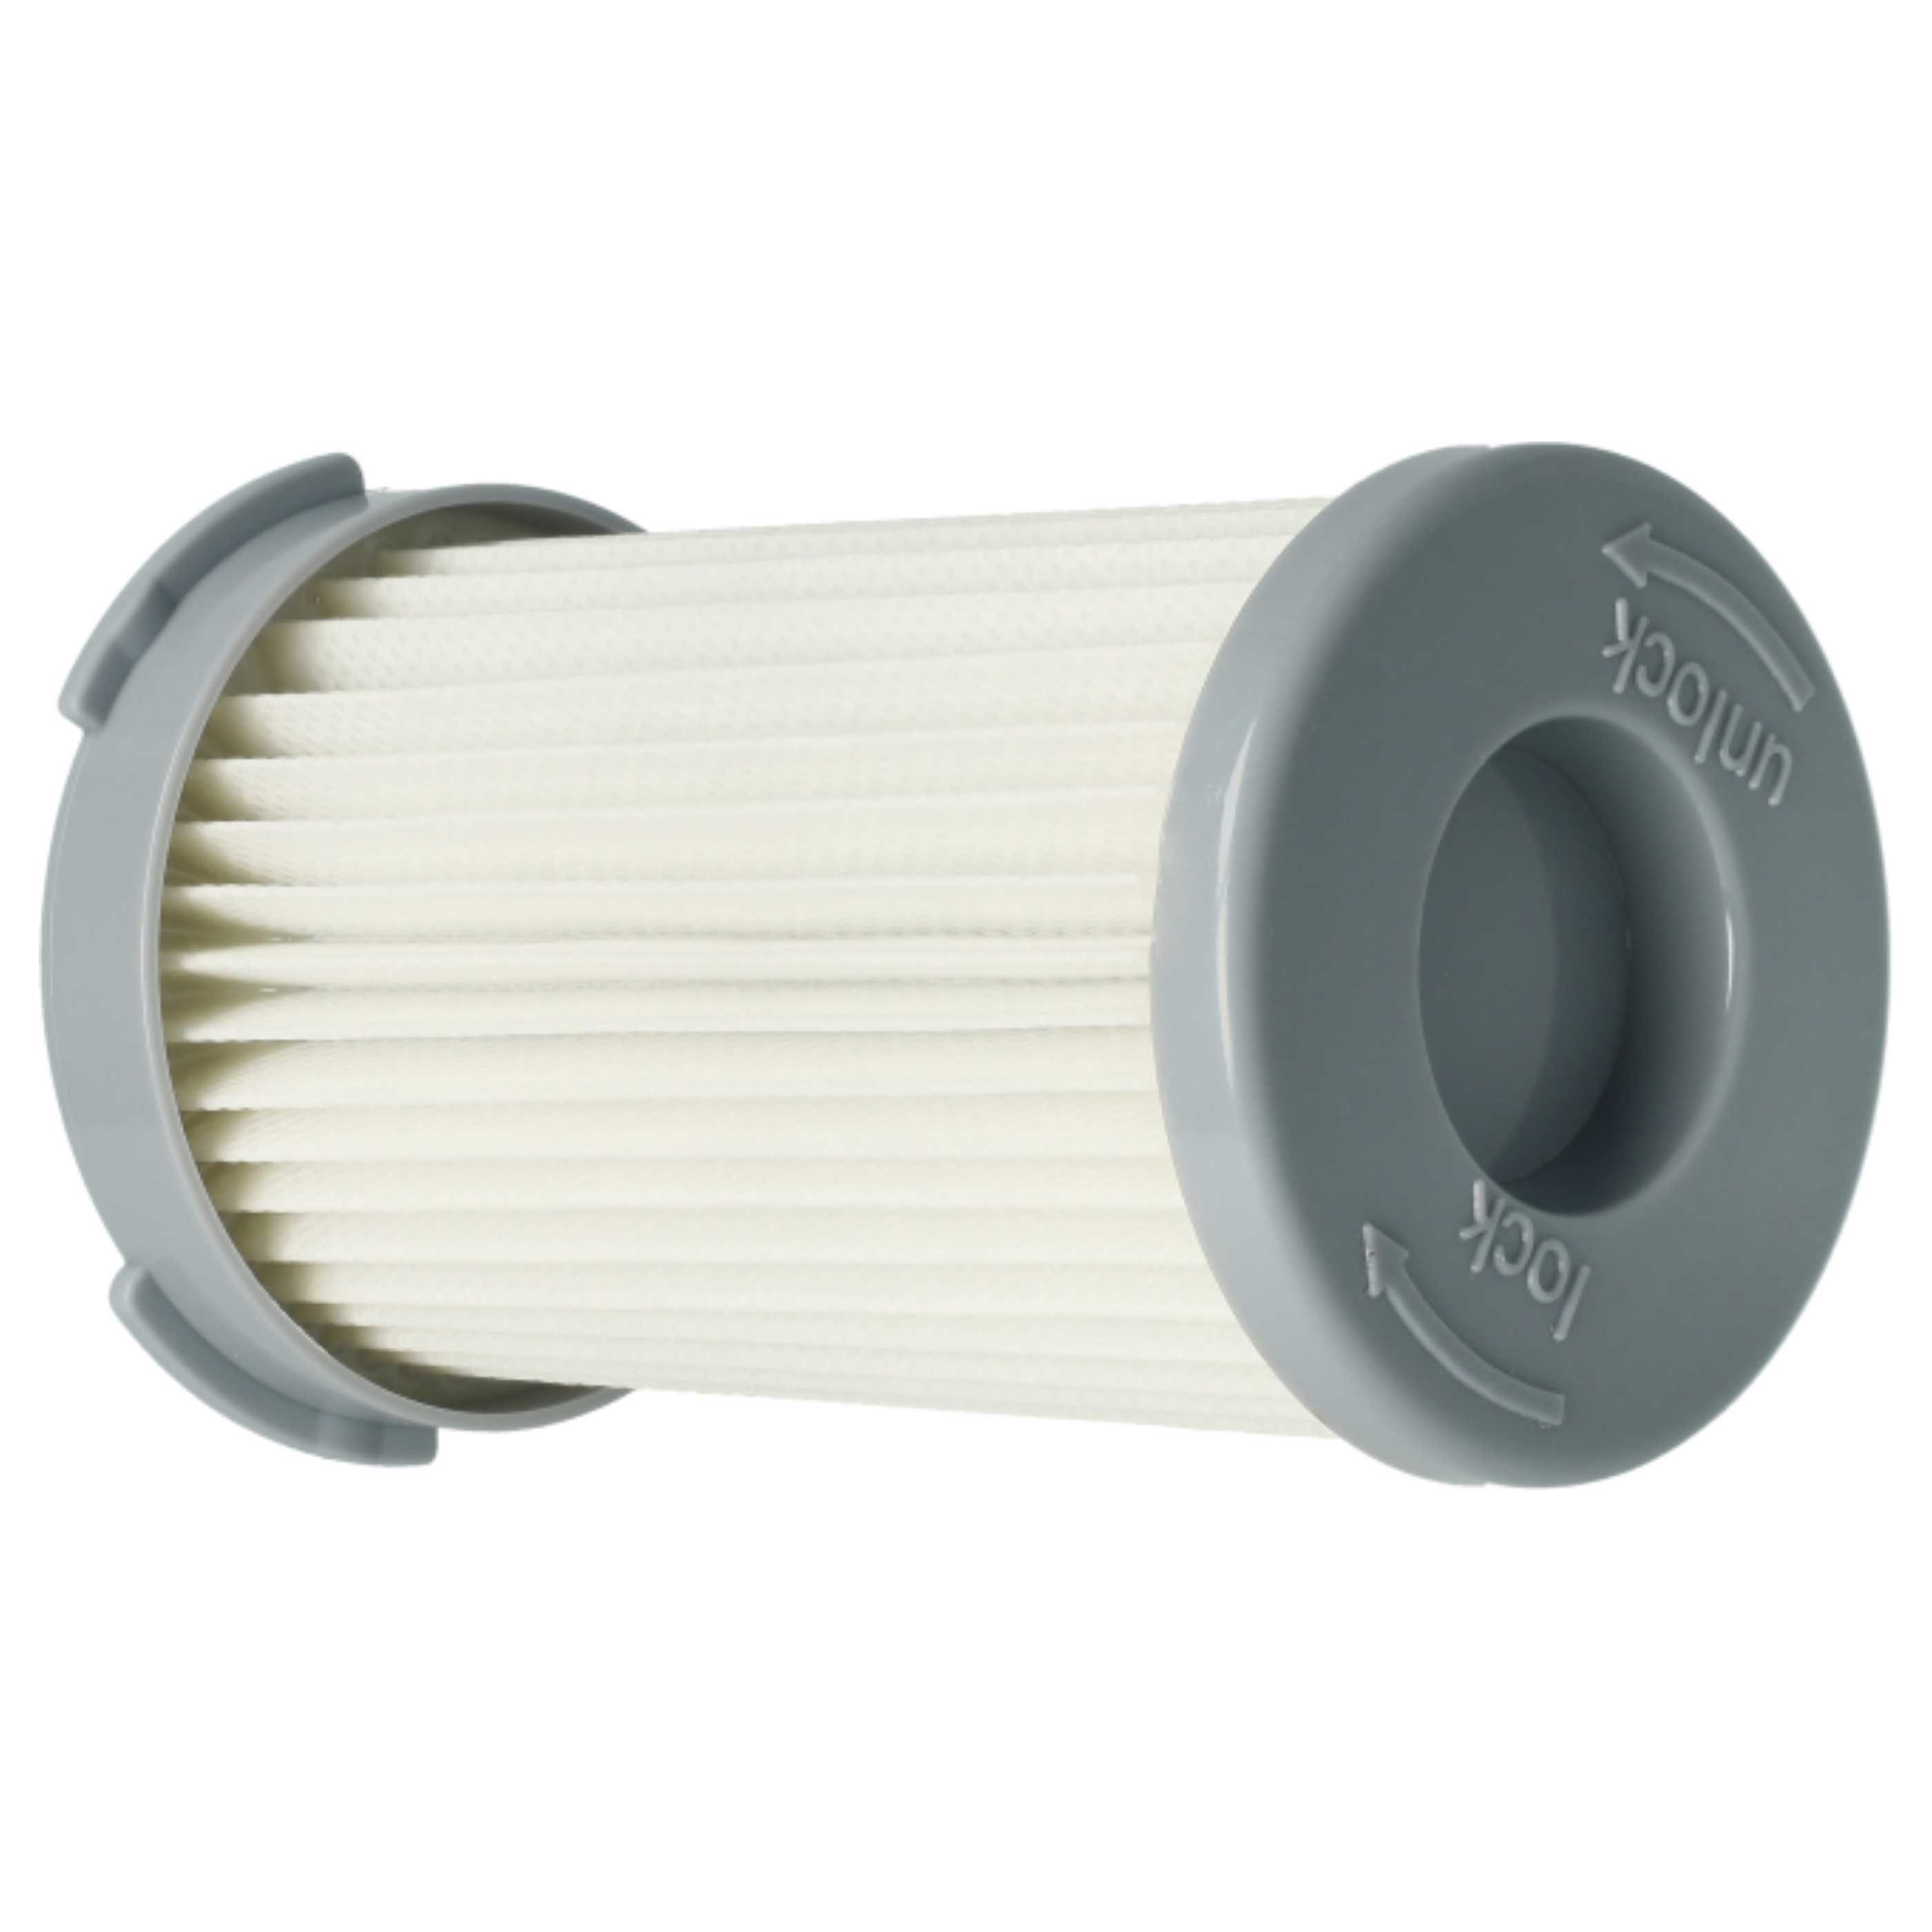 3x exhaust filter replaces Electrolux EF75B for AEGVacuum Cleaner